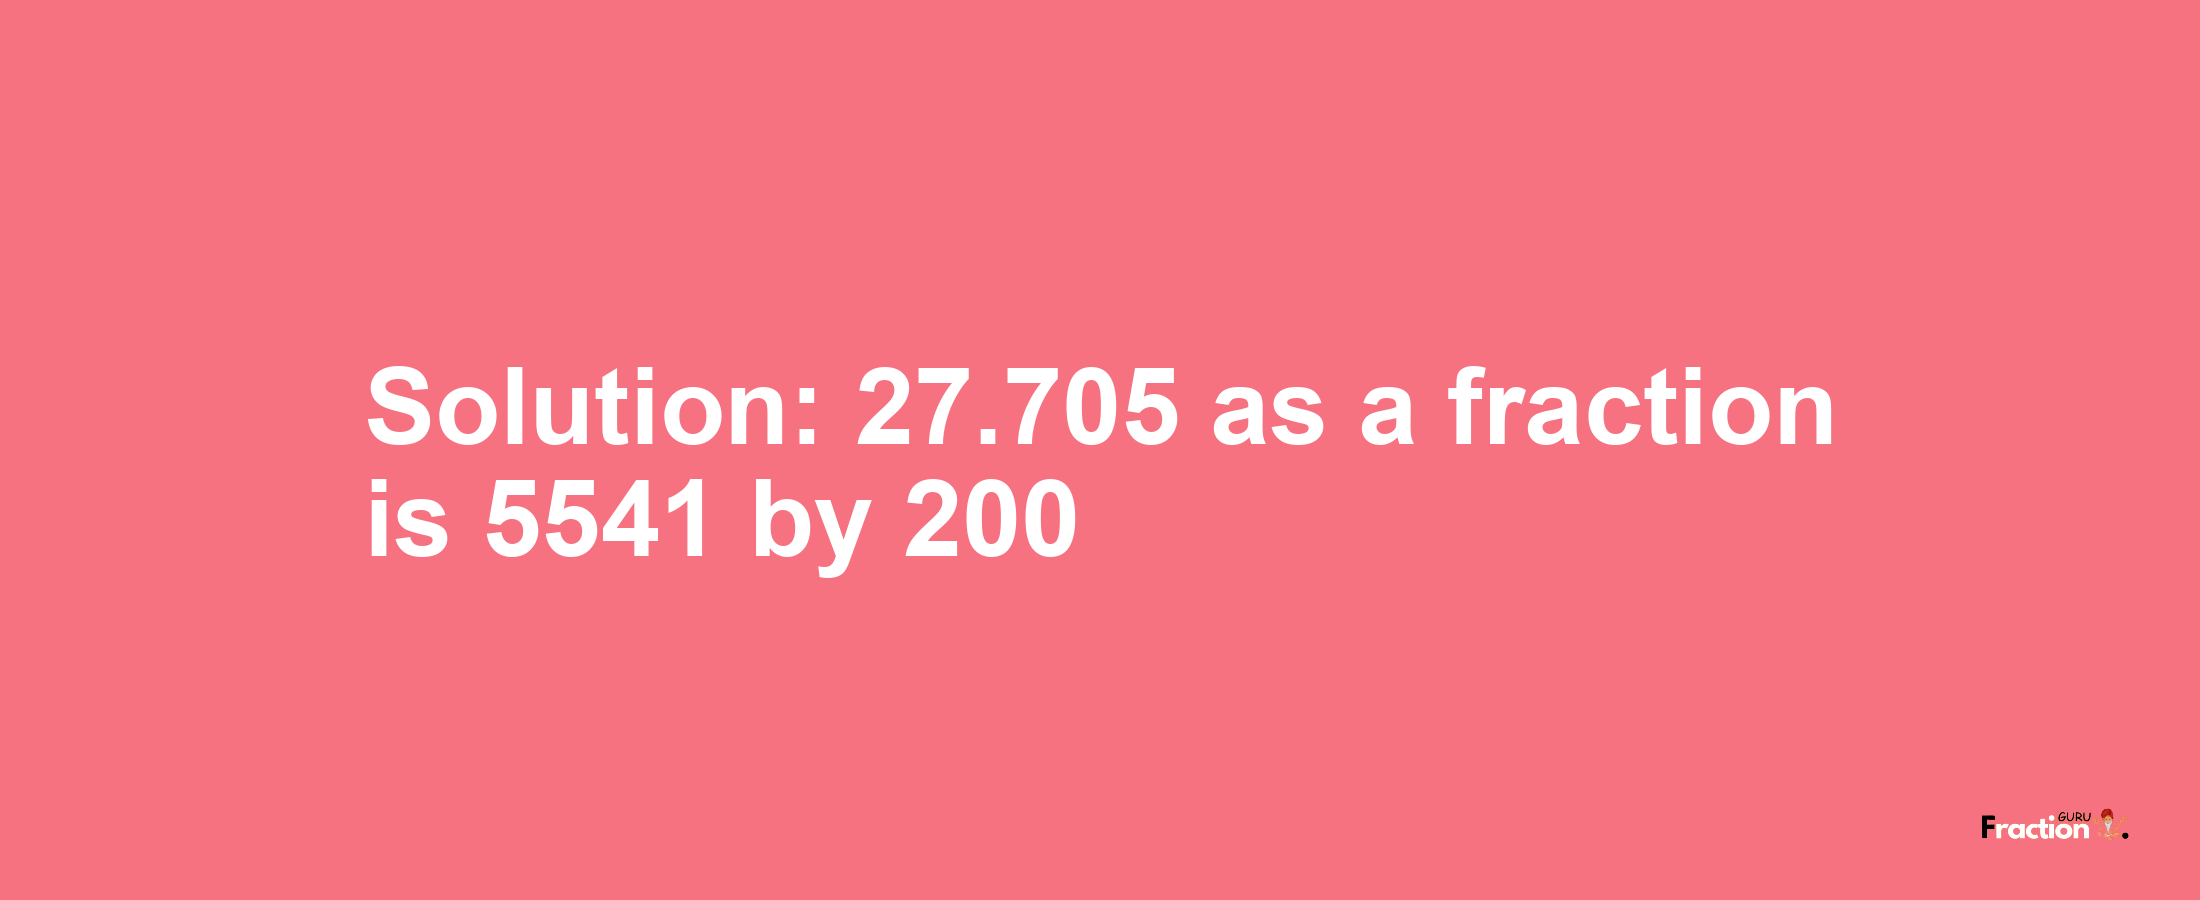 Solution:27.705 as a fraction is 5541/200